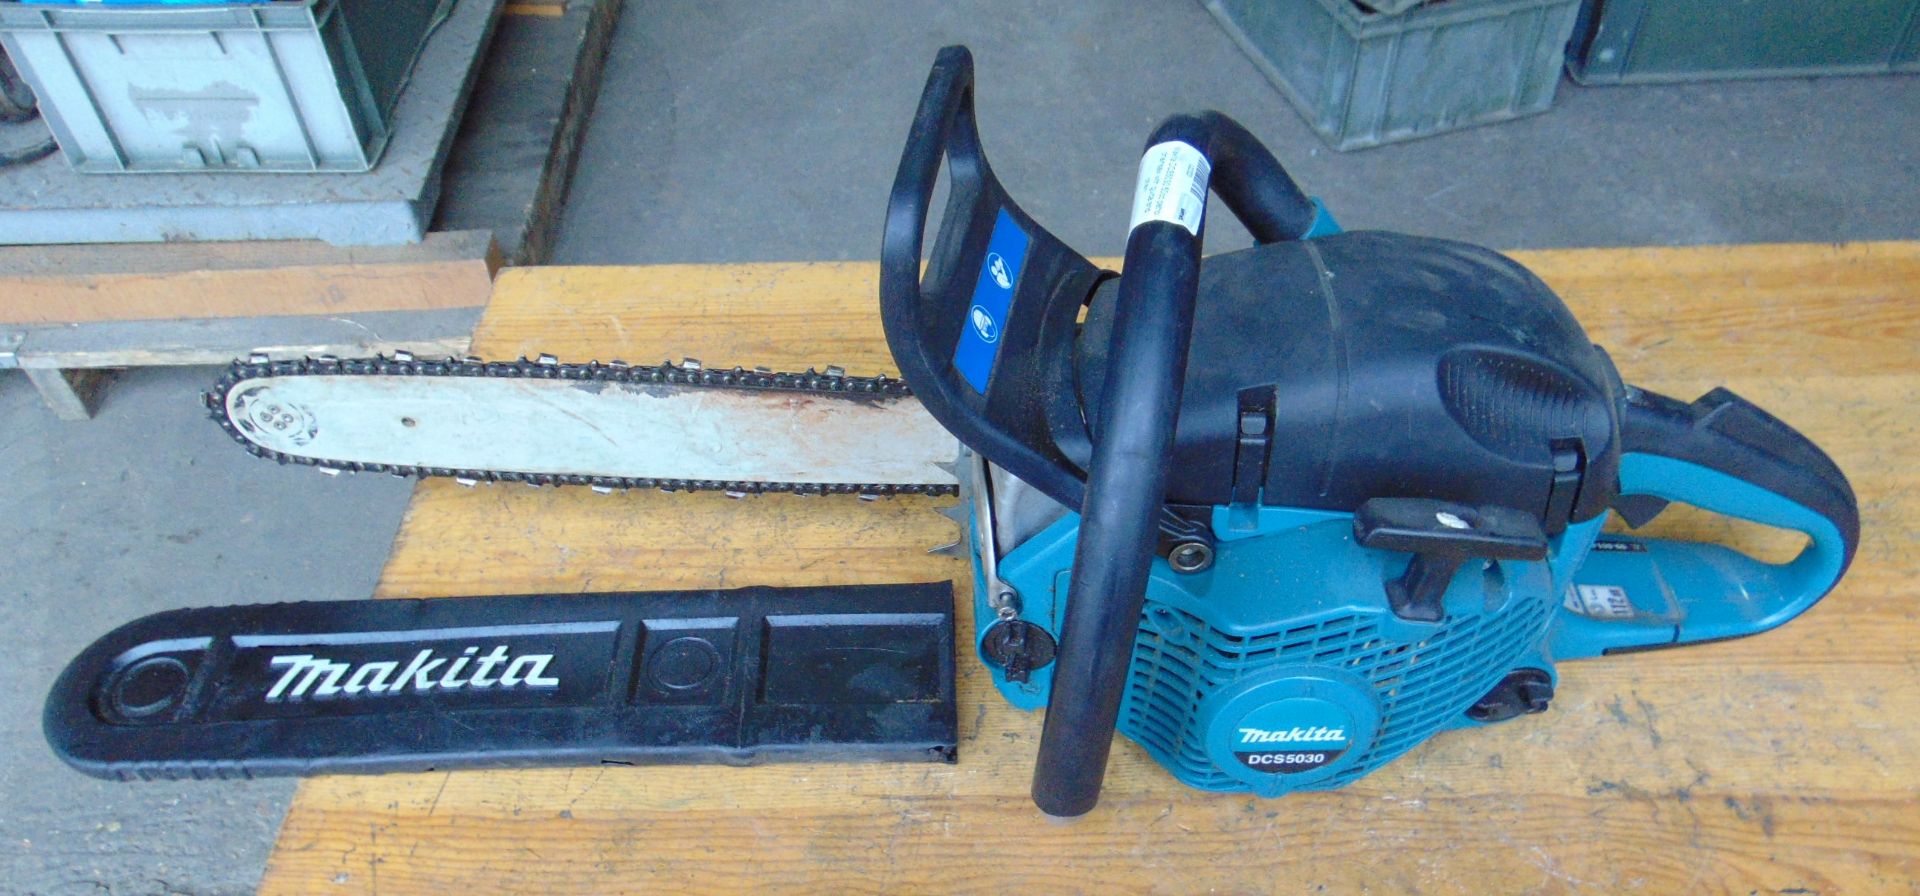 MAKITA DCS 5030 50CC Chainsaw c/w Chain Guard from MoD. - Image 2 of 5